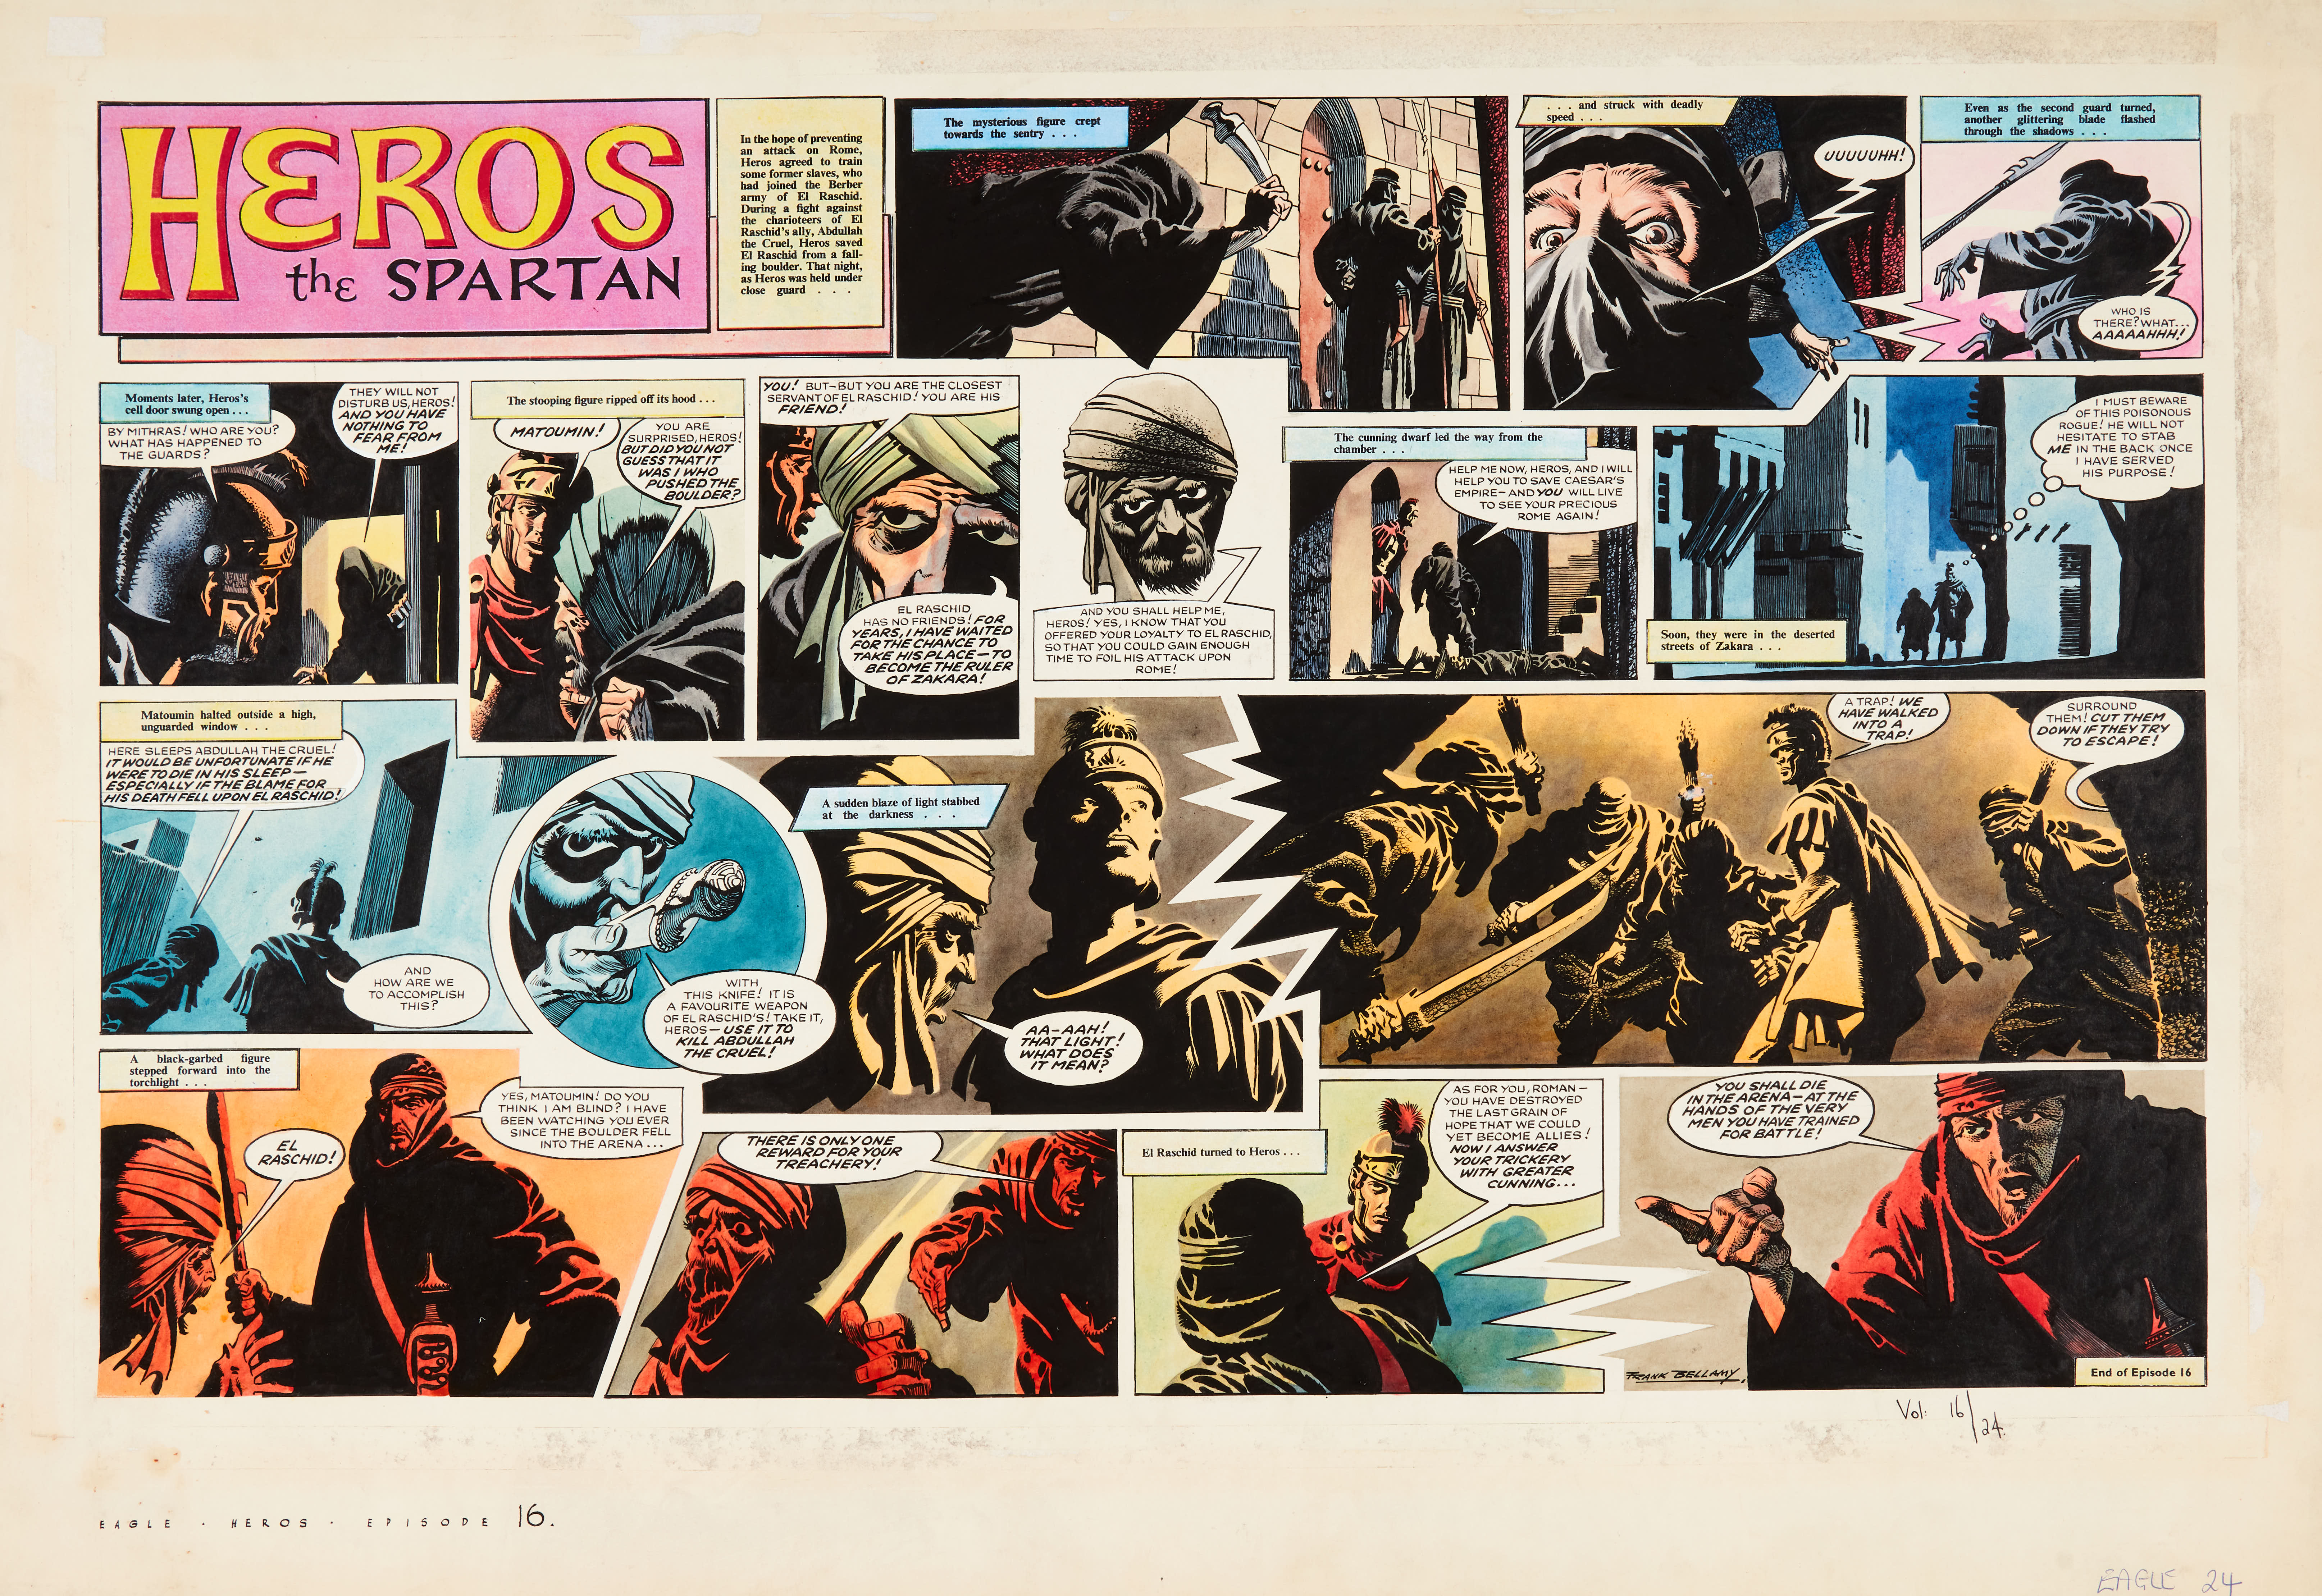 Heros the Spartan original double-page artwork (1965) painted and signed by Frank Bellamy. From